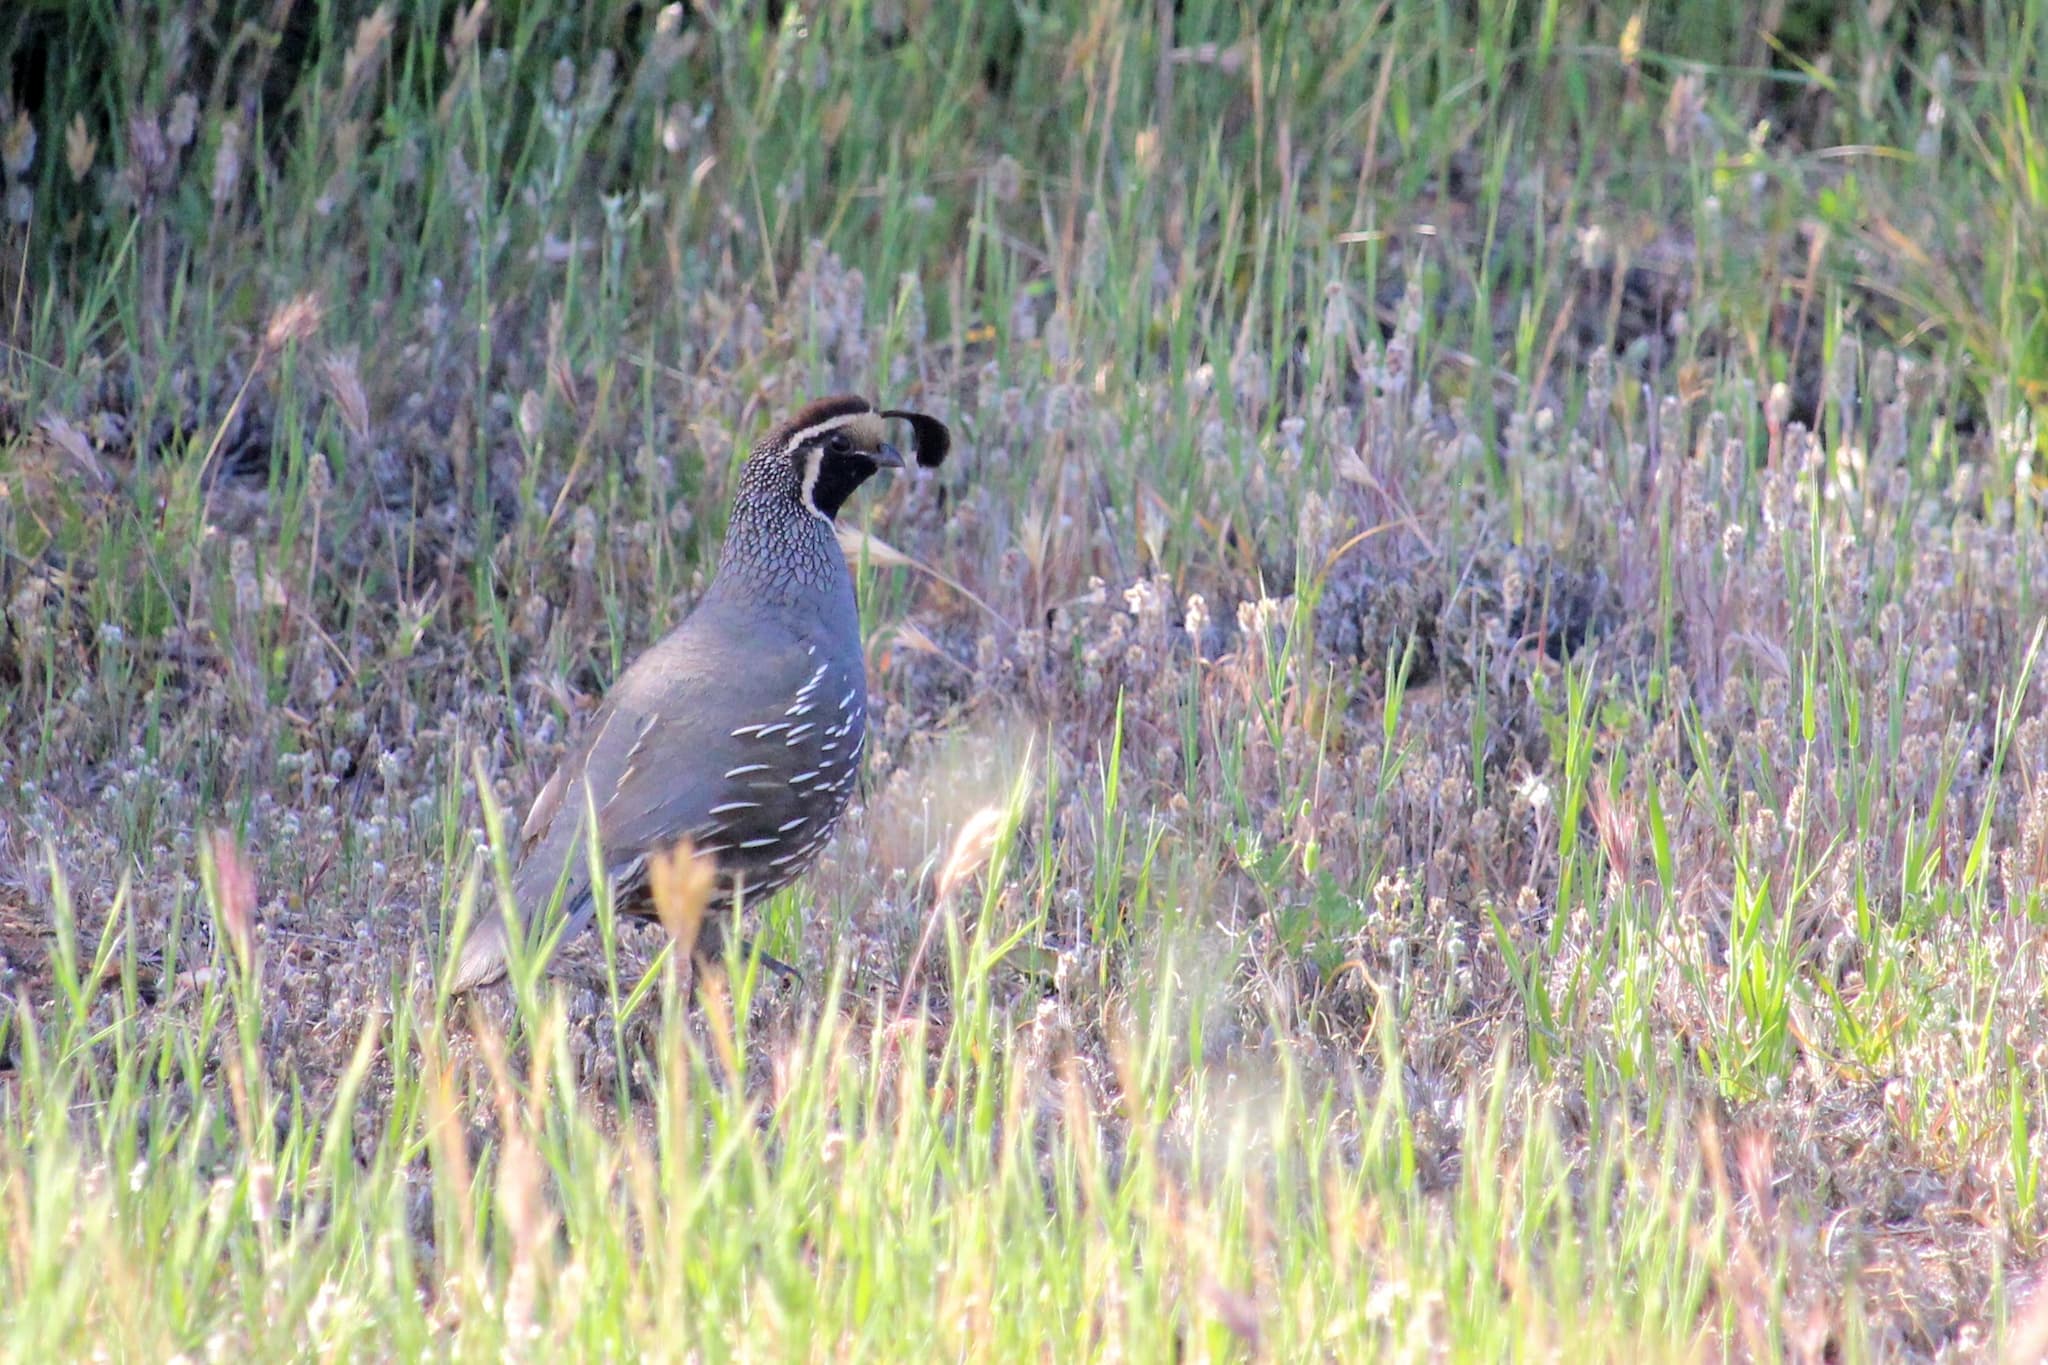 Gray bird with tuft hanging in front of it's black face standing upright in grass.